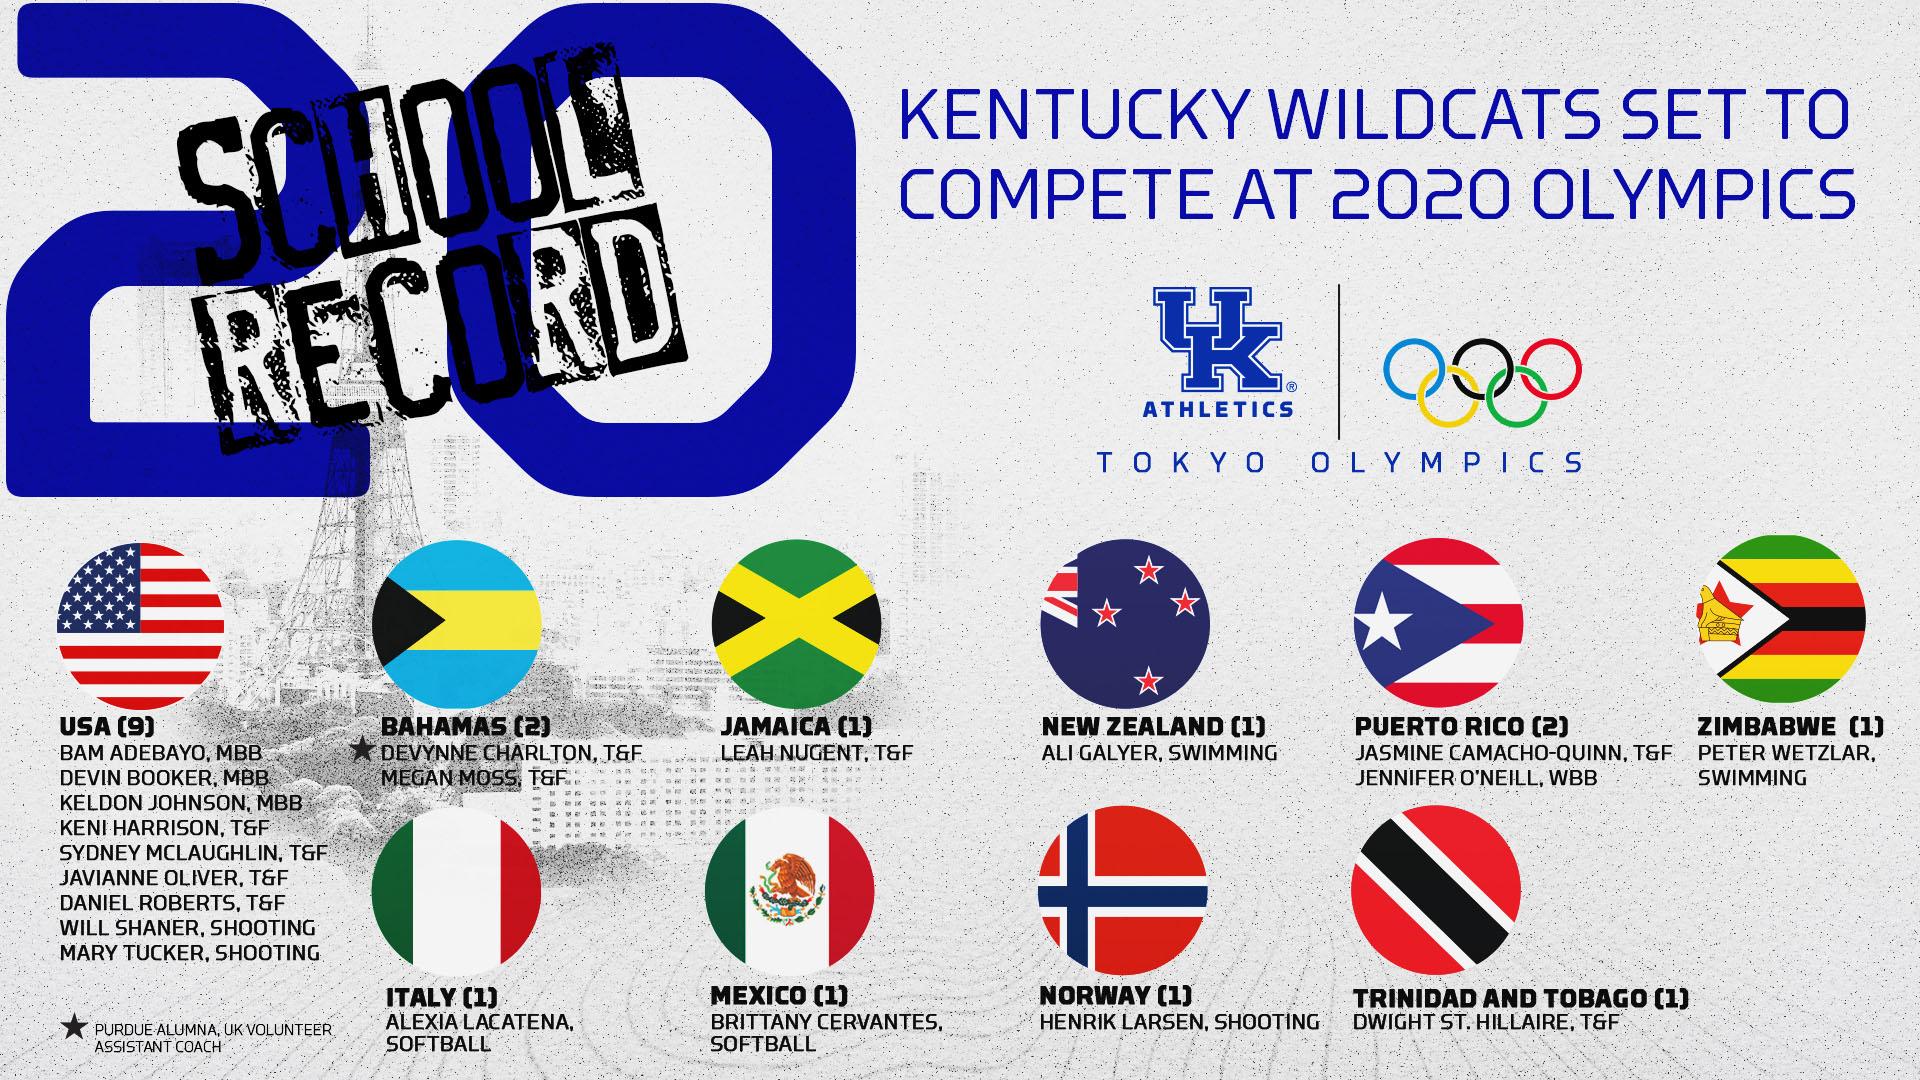 School-Record 20 Wildcats to Compete in Olympics